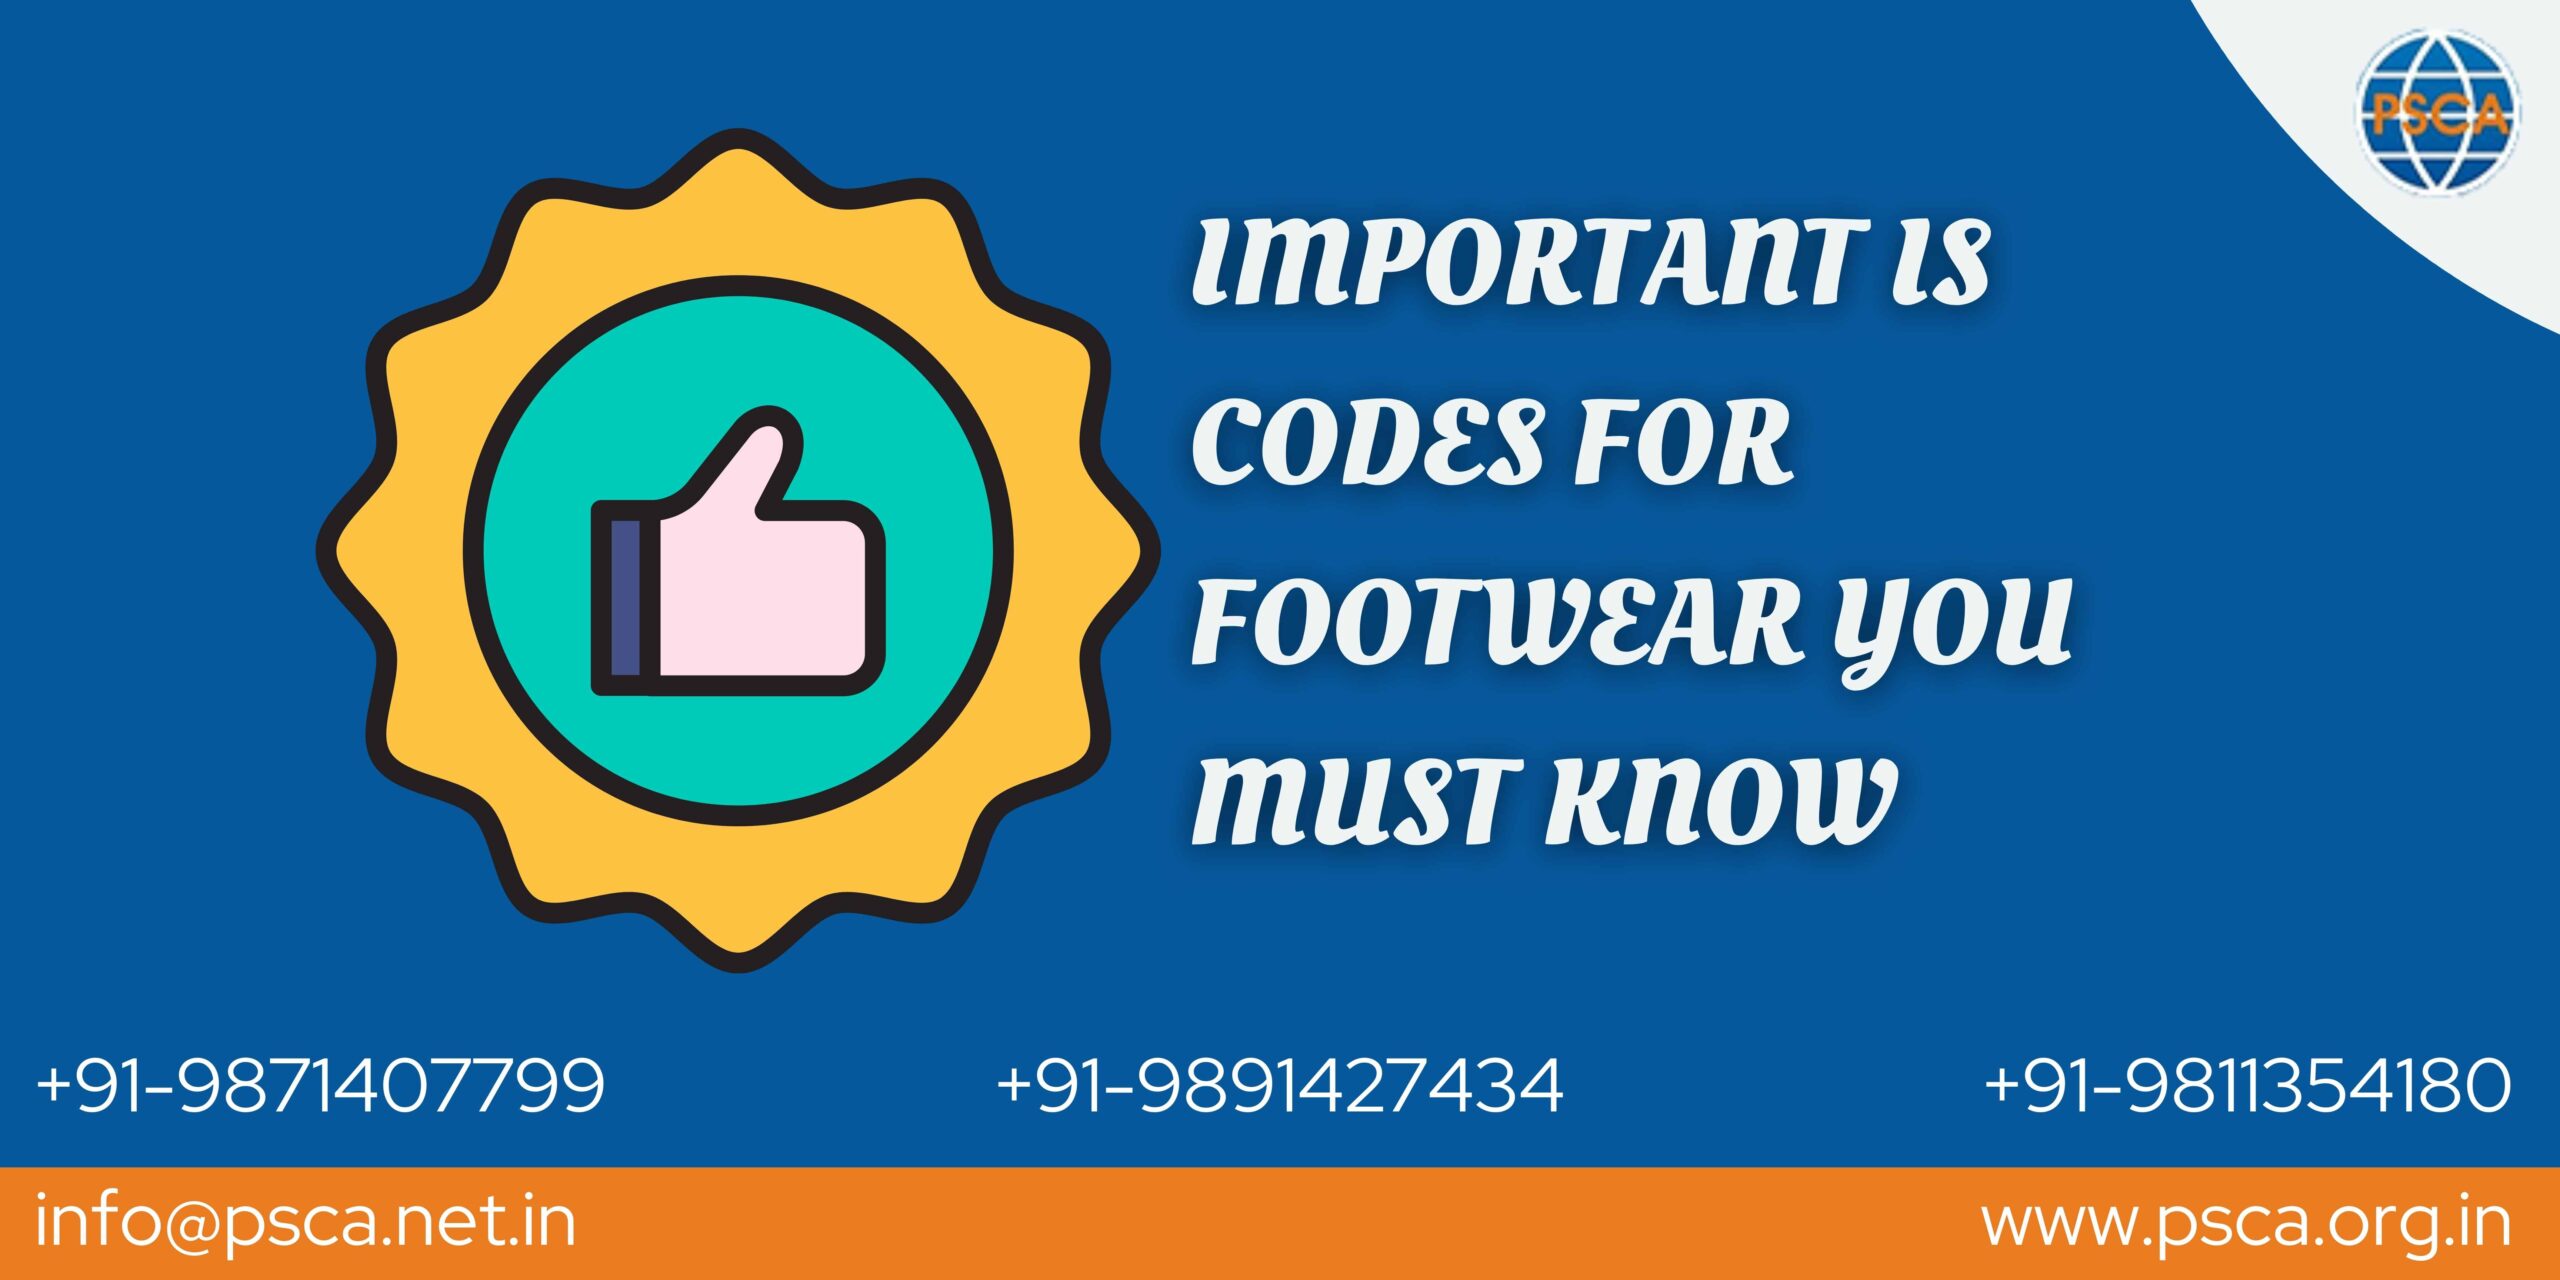 BIS Certification for Footwear in India: A Must Know